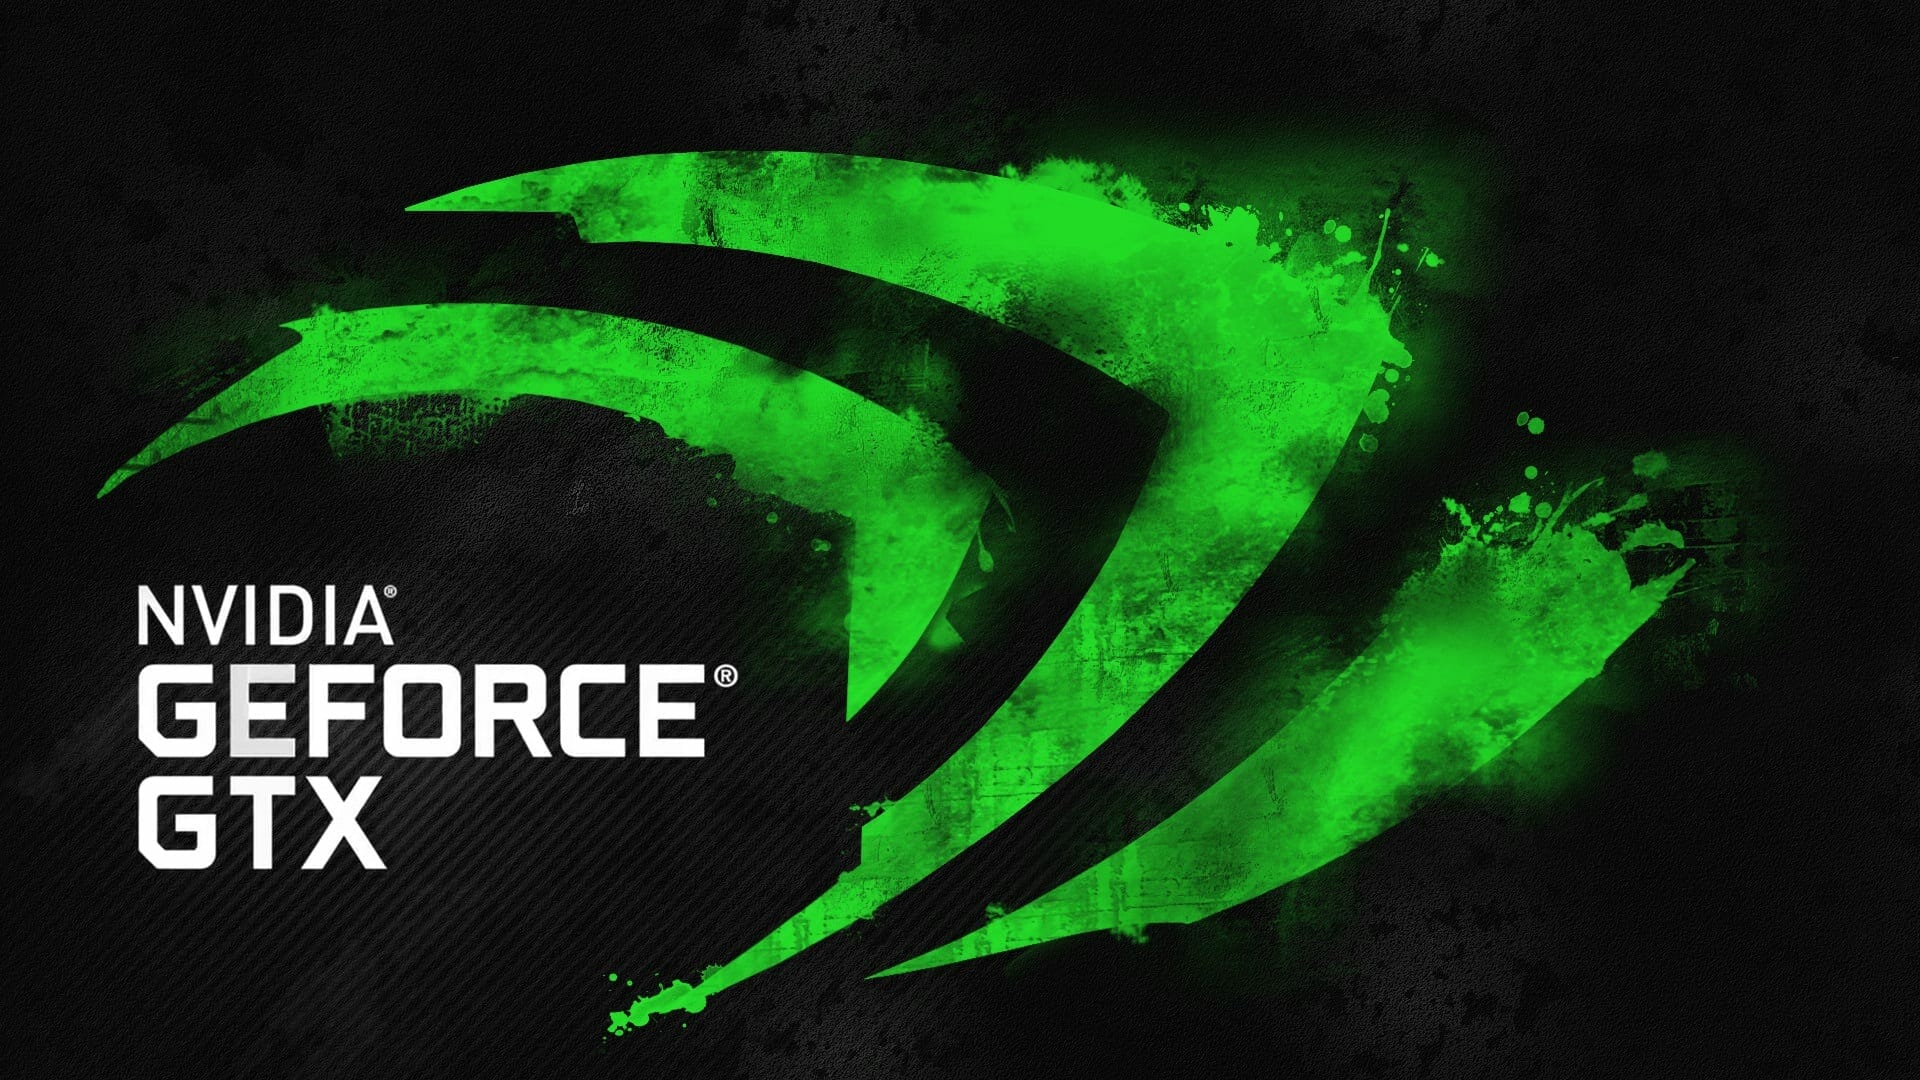 Install GeForce Driver without GeForce Experience